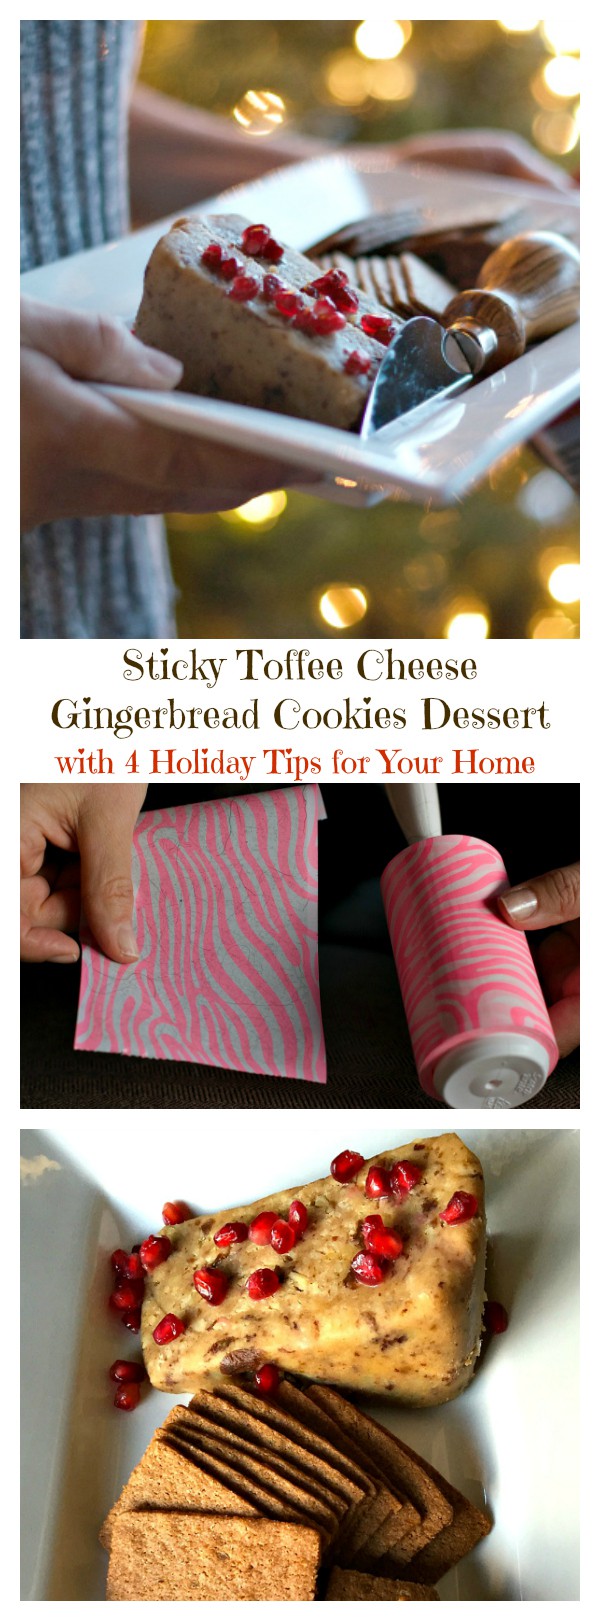 Sticky Toffee Cheese Gingerbread Cookies Dessert with 4 Holiday Tips for Your Home